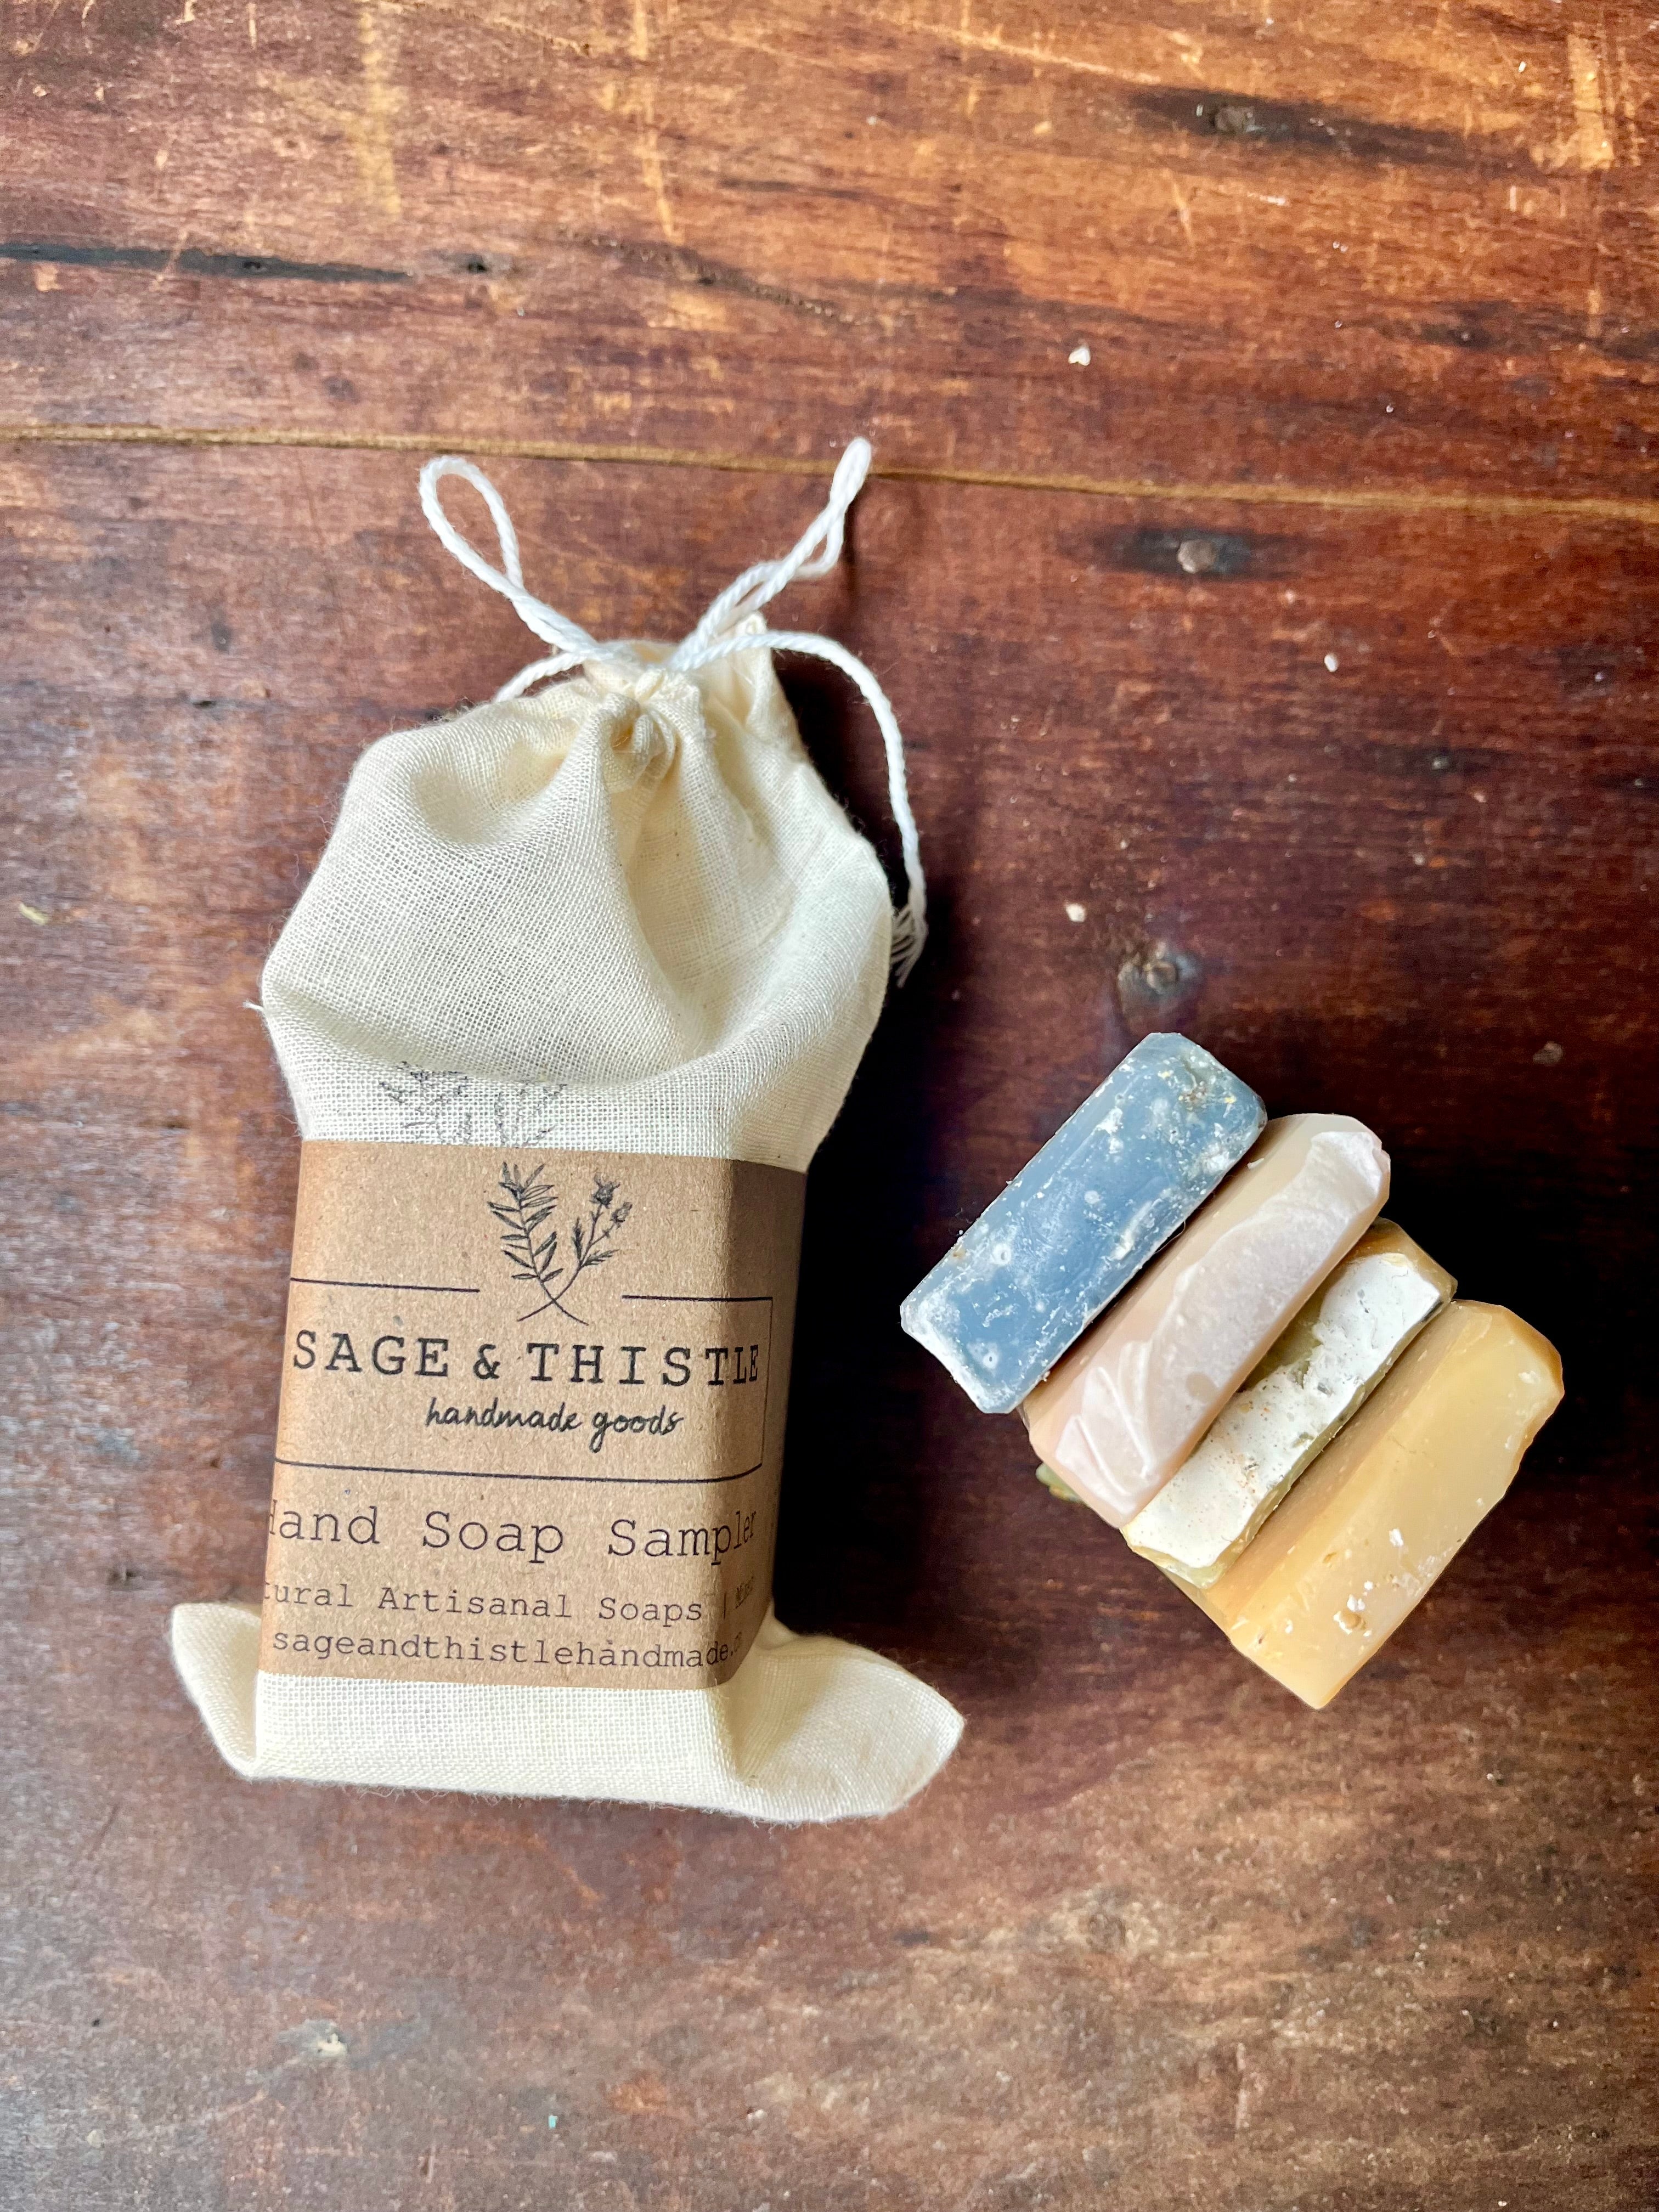 Hand Soap Sampler: A collection of four small, 100% natural artisanal hand soaps packaged in a reusable cotton bag. 